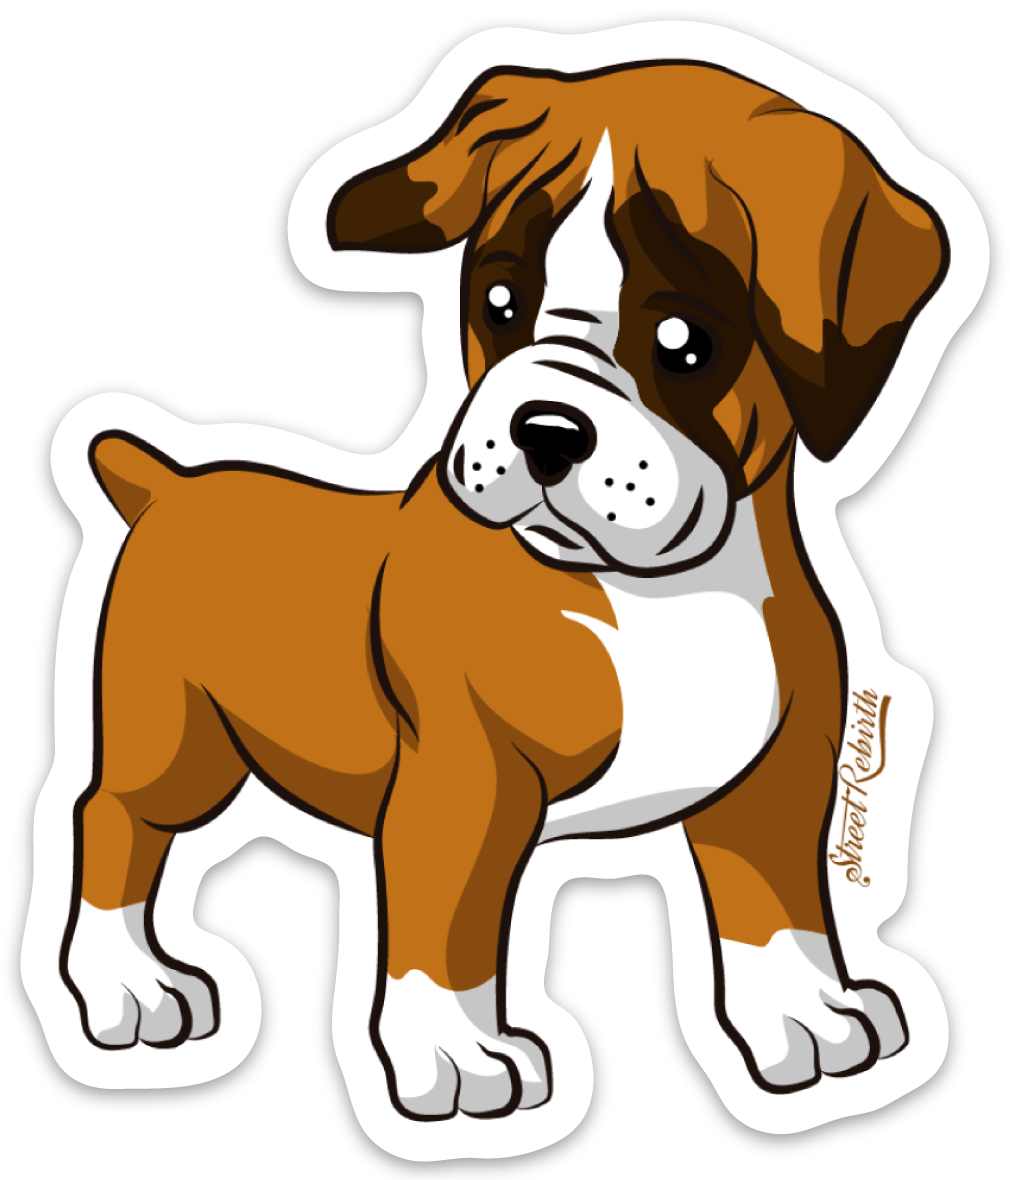 Boxer Dog PUN STICKER – ONE 4 INCH WATER PROOF VINYL STICKER – FOR HYDRO FLASK, SKATEBOARD, LAPTOP, PLANNER, CAR, COLLECTING, GIFTING